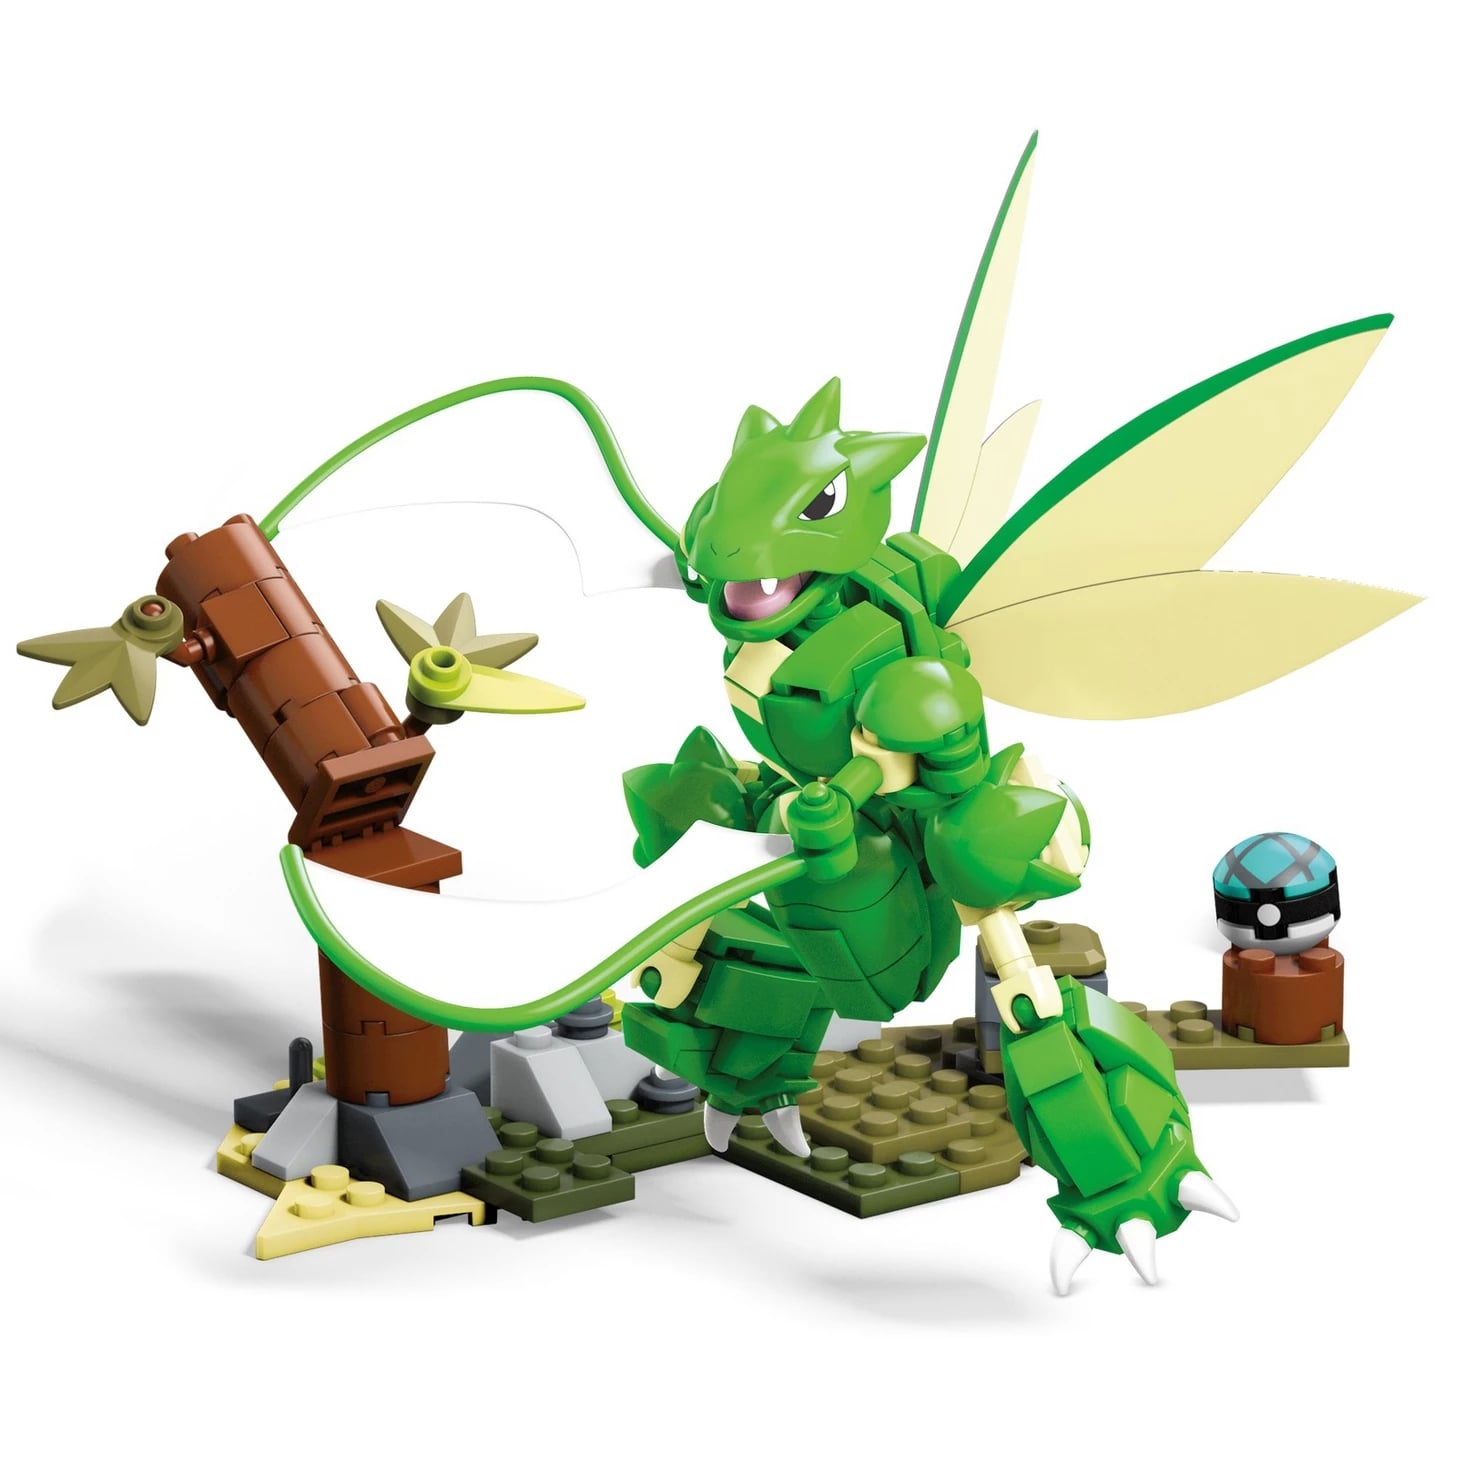 Mega Construx Pokemon Scyther | Need to Pick Up a Perfect Gift? Here Are  Top Toys of 2019